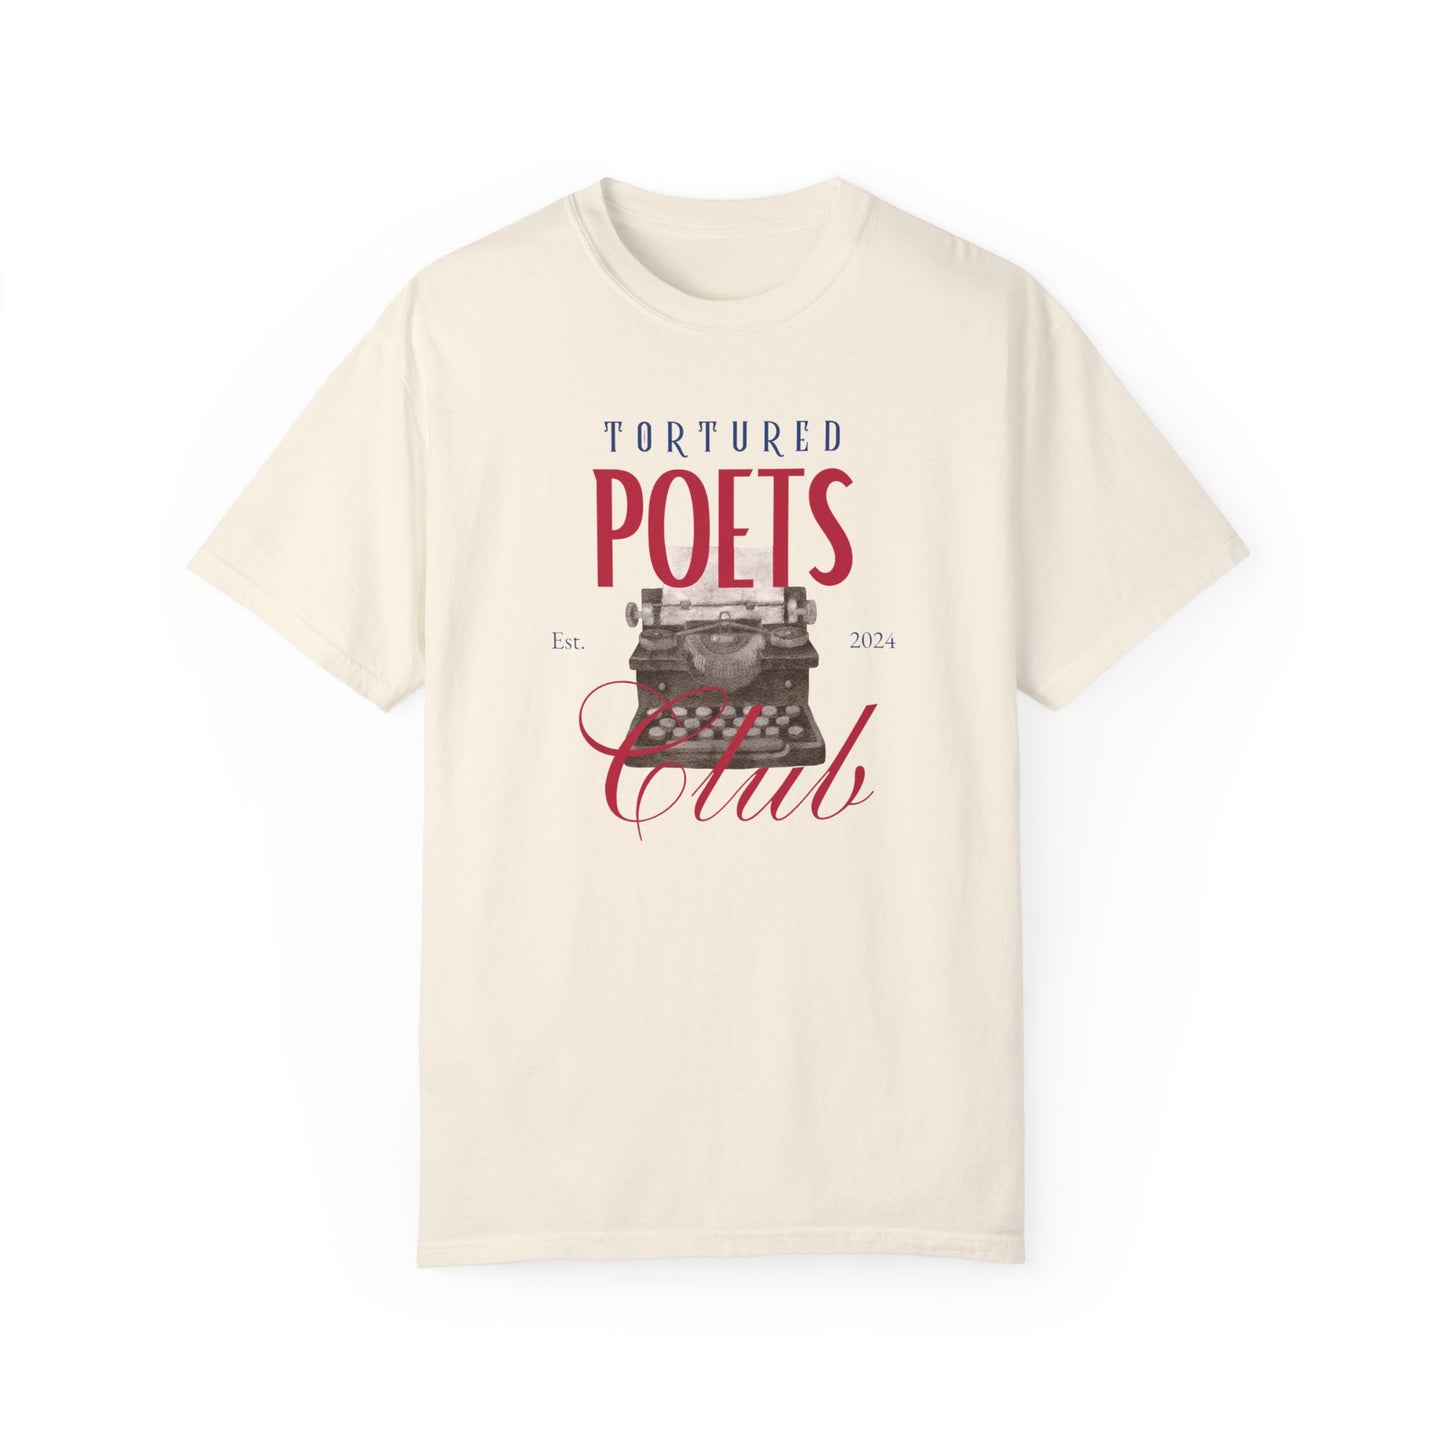 The Tortured Poets T-shirt